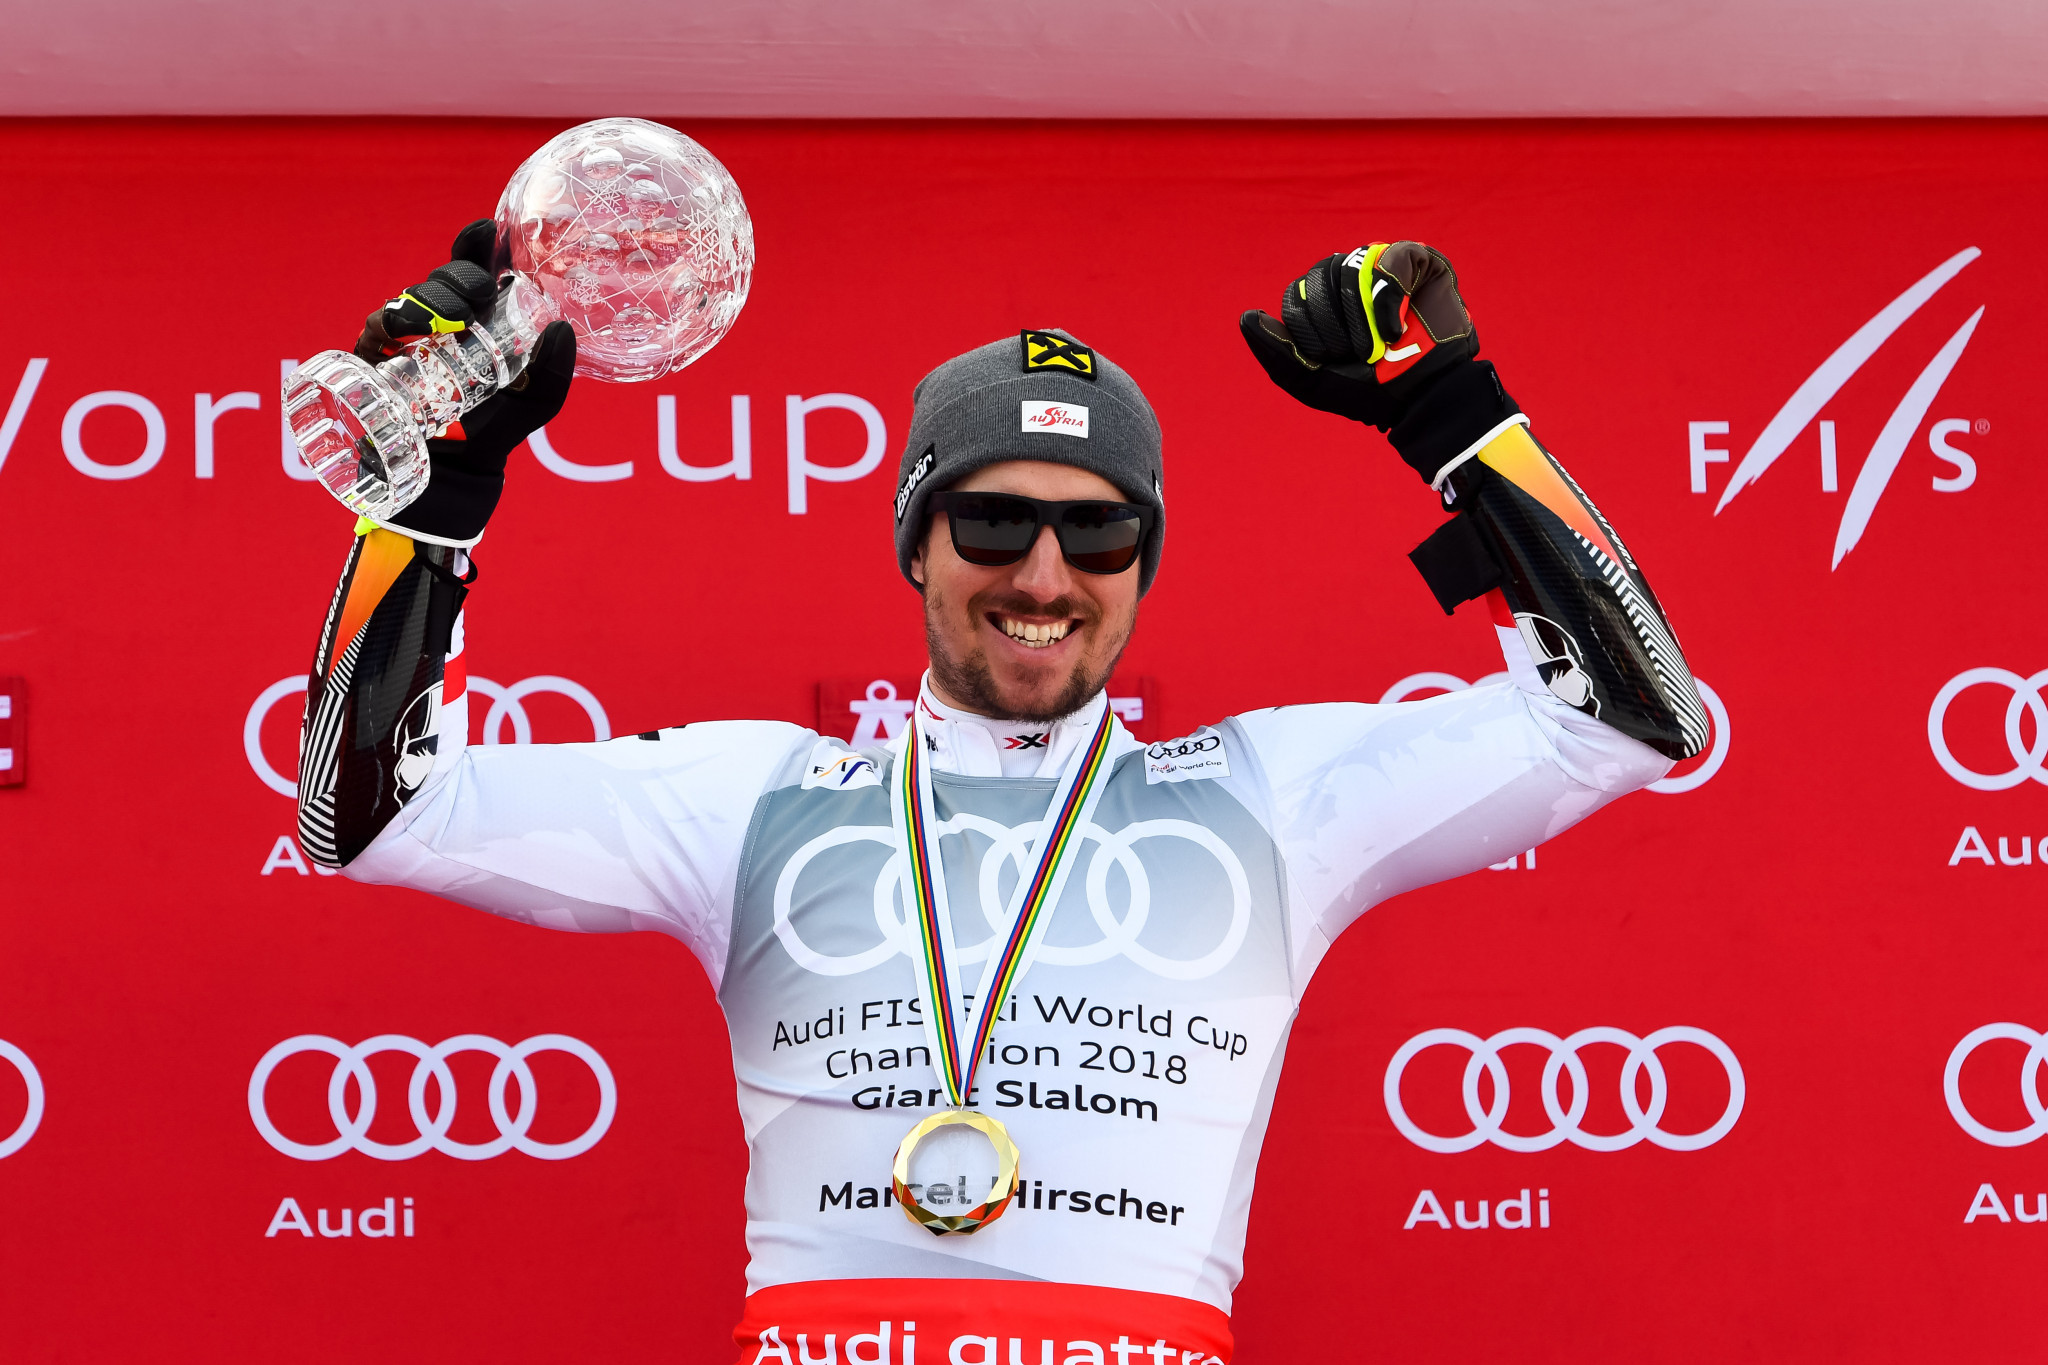 Hirscher wins overall giant slalom title at World Cup Final in Åre